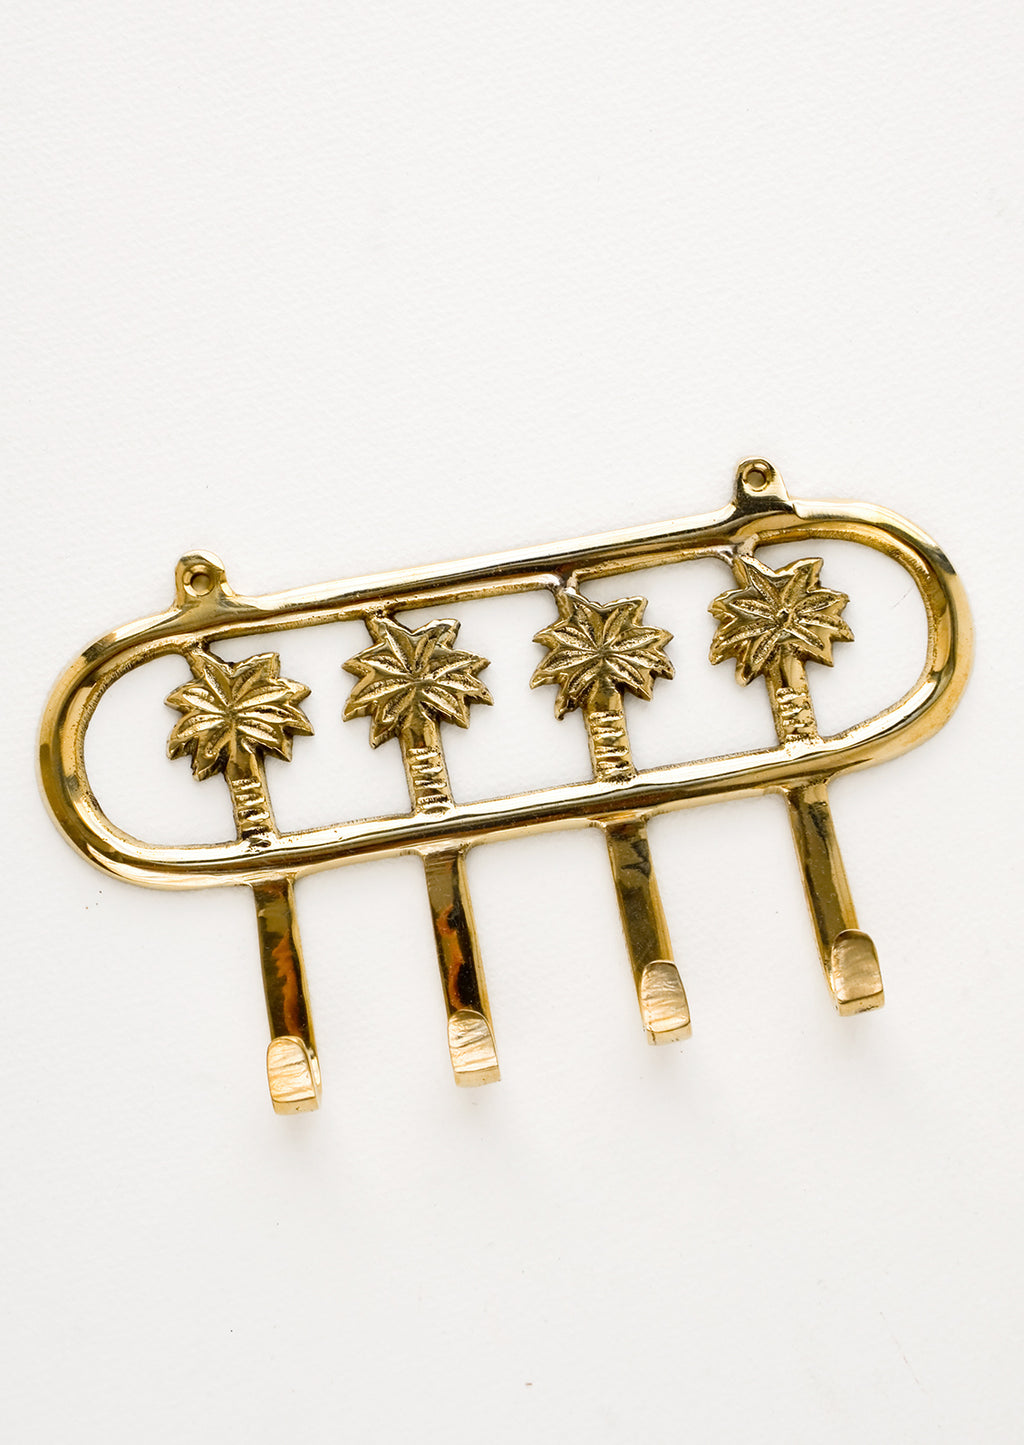 1: Wall mountable hook rack with 4 palm trees extending into hooks, made in brass